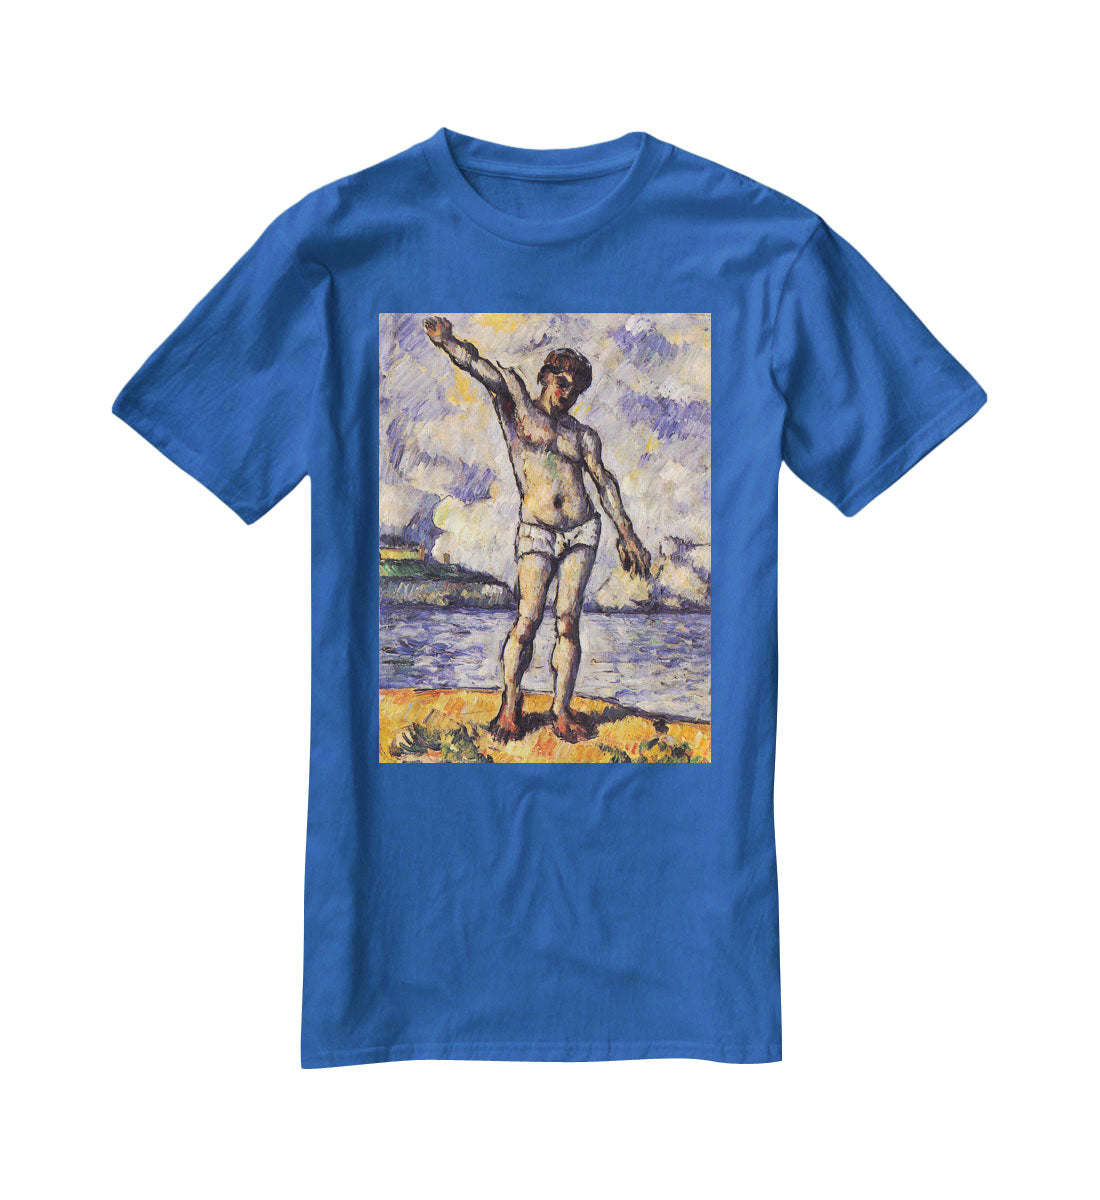 Swimmer with outstretched arms by Cezanne T-Shirt - Canvas Art Rocks - 2